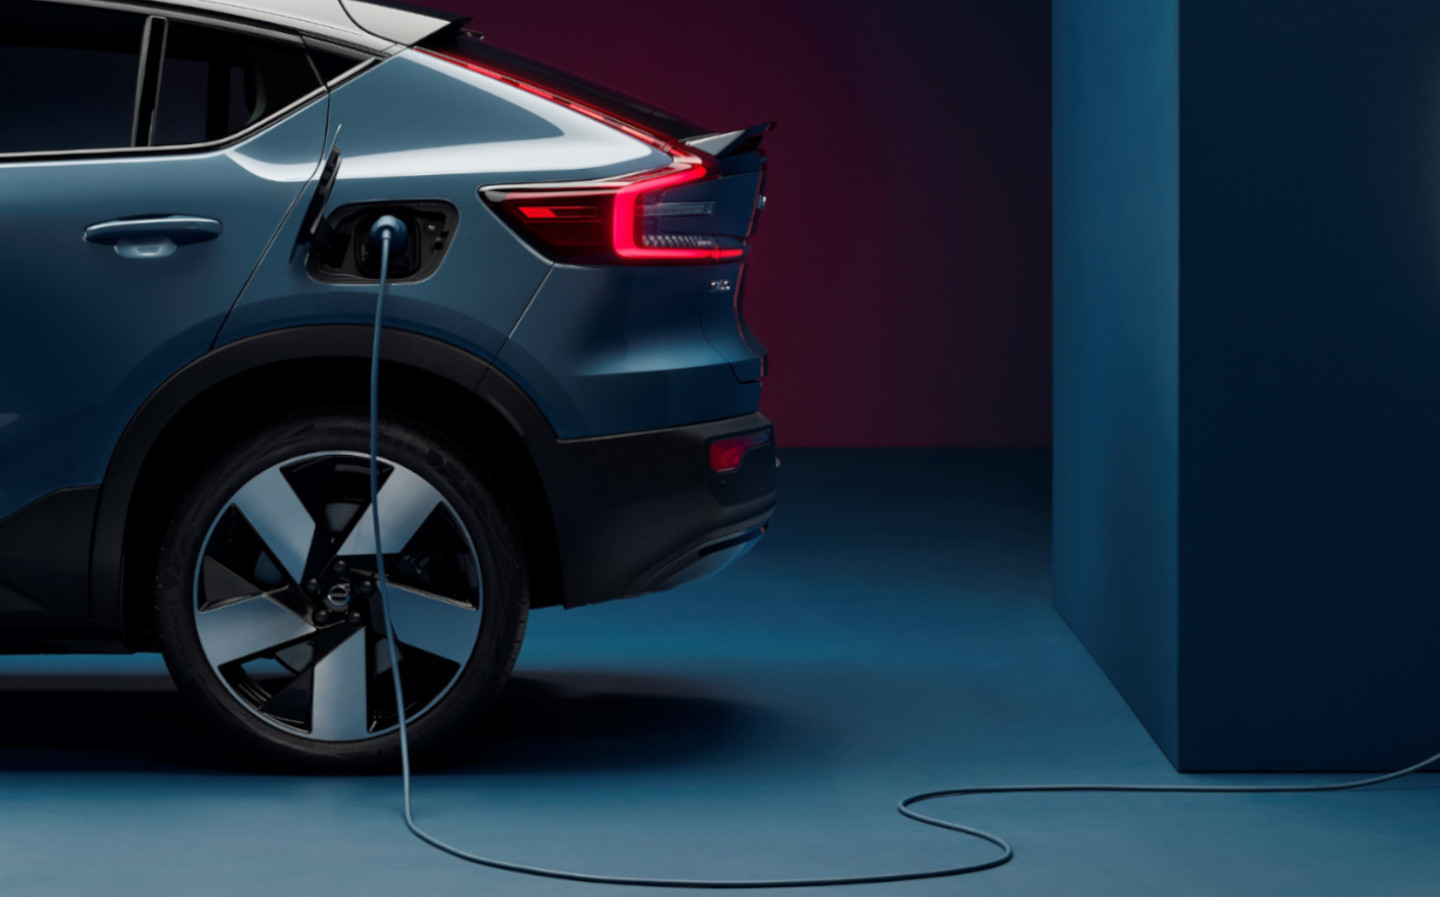 Volvo considers public offering to fund electrification plans